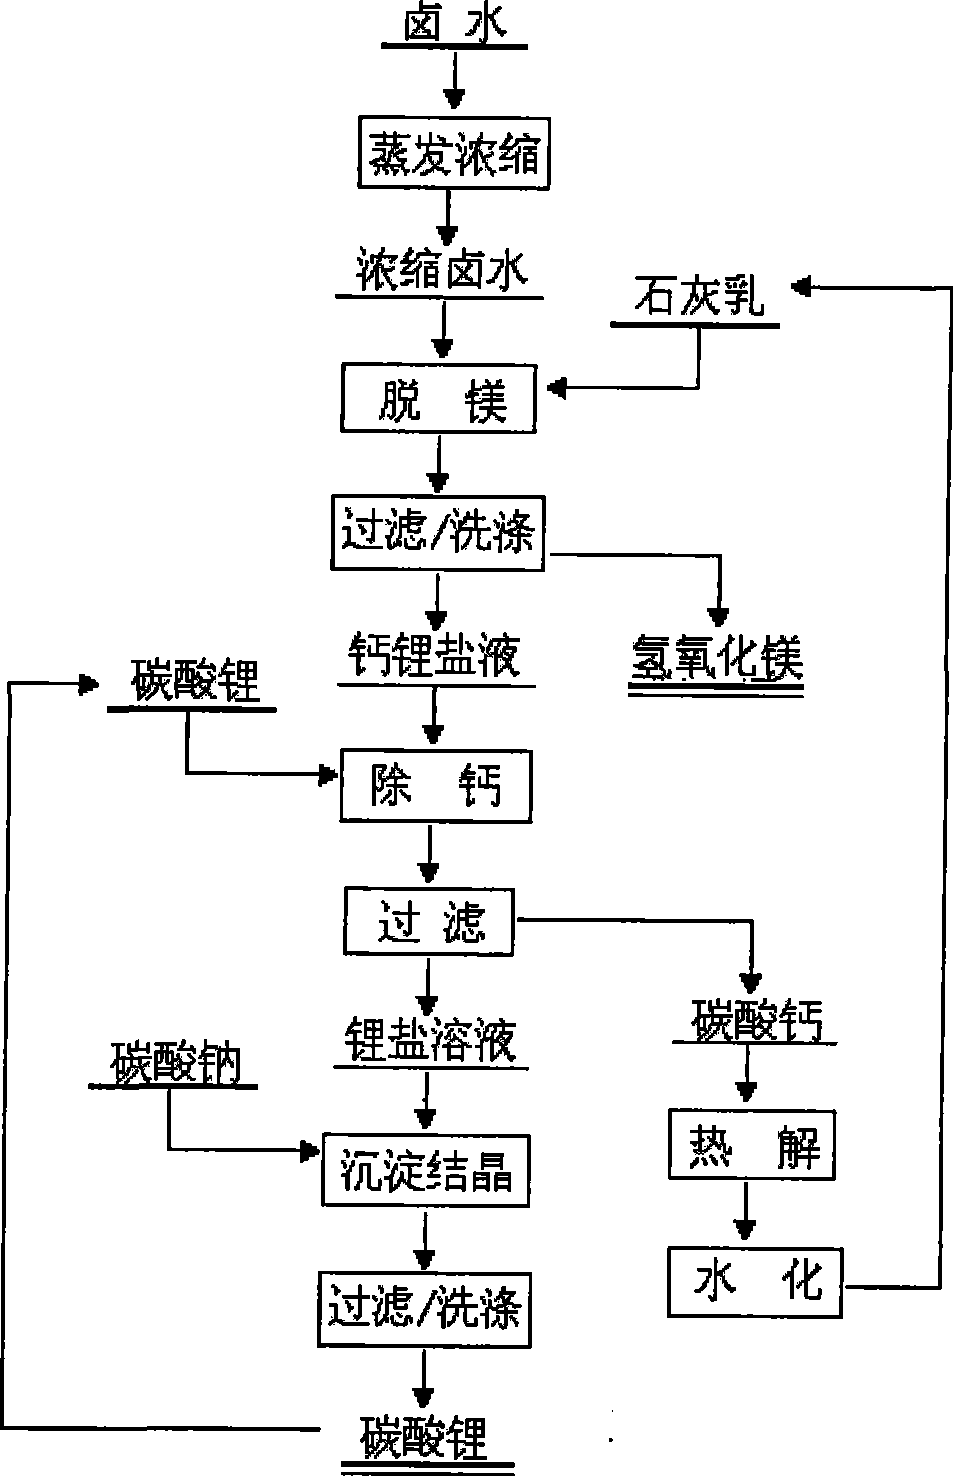 Method for extracting lithium salt from salt lake bittern with low-magnesium-lithium ratio with calcium circulation solid phase conversion method